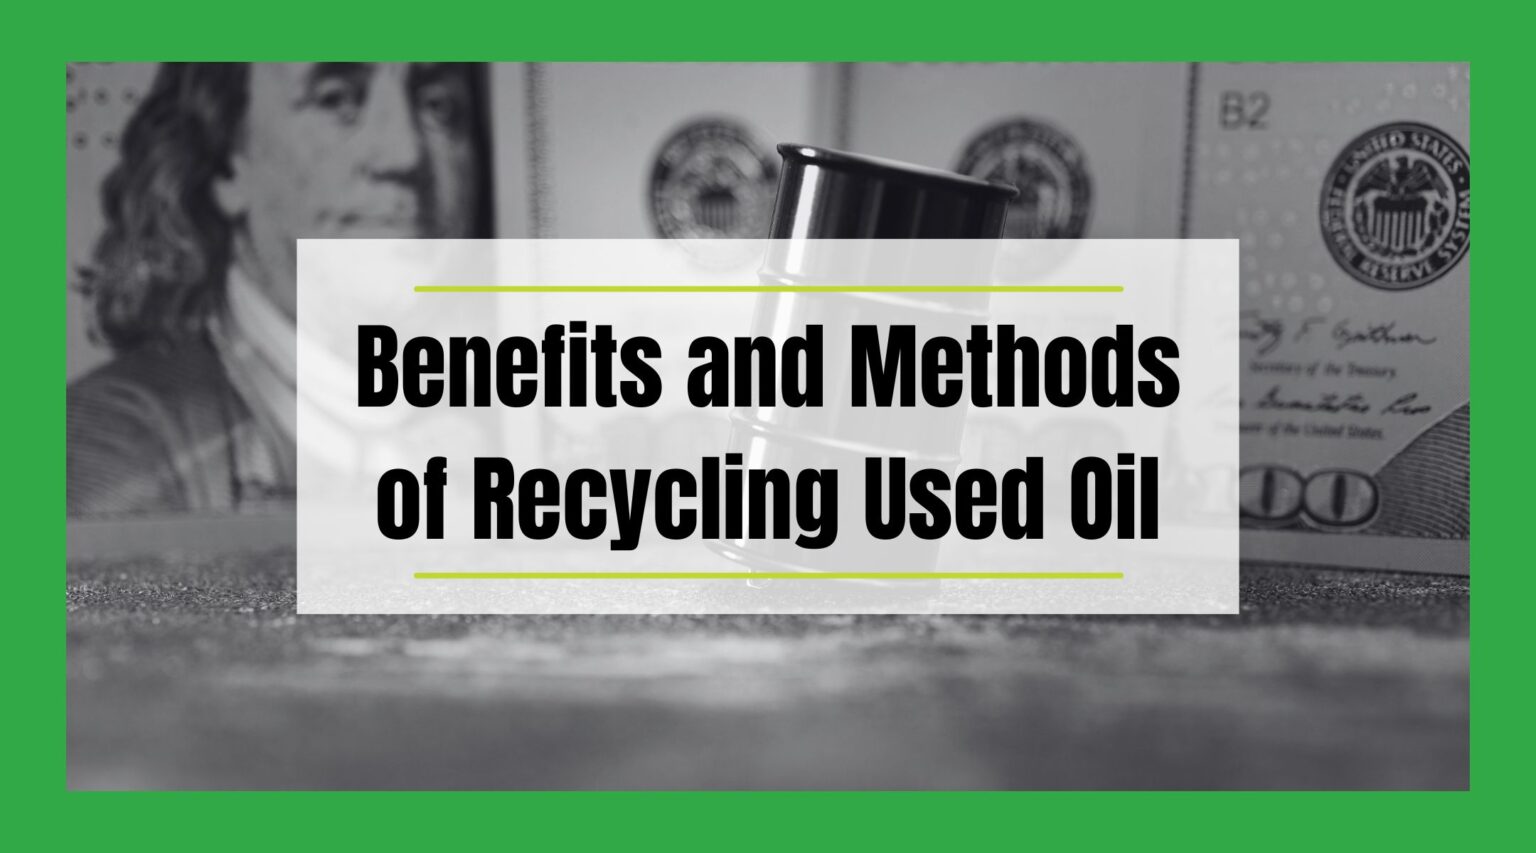 Benefits and Methods of Recycling Used Oil